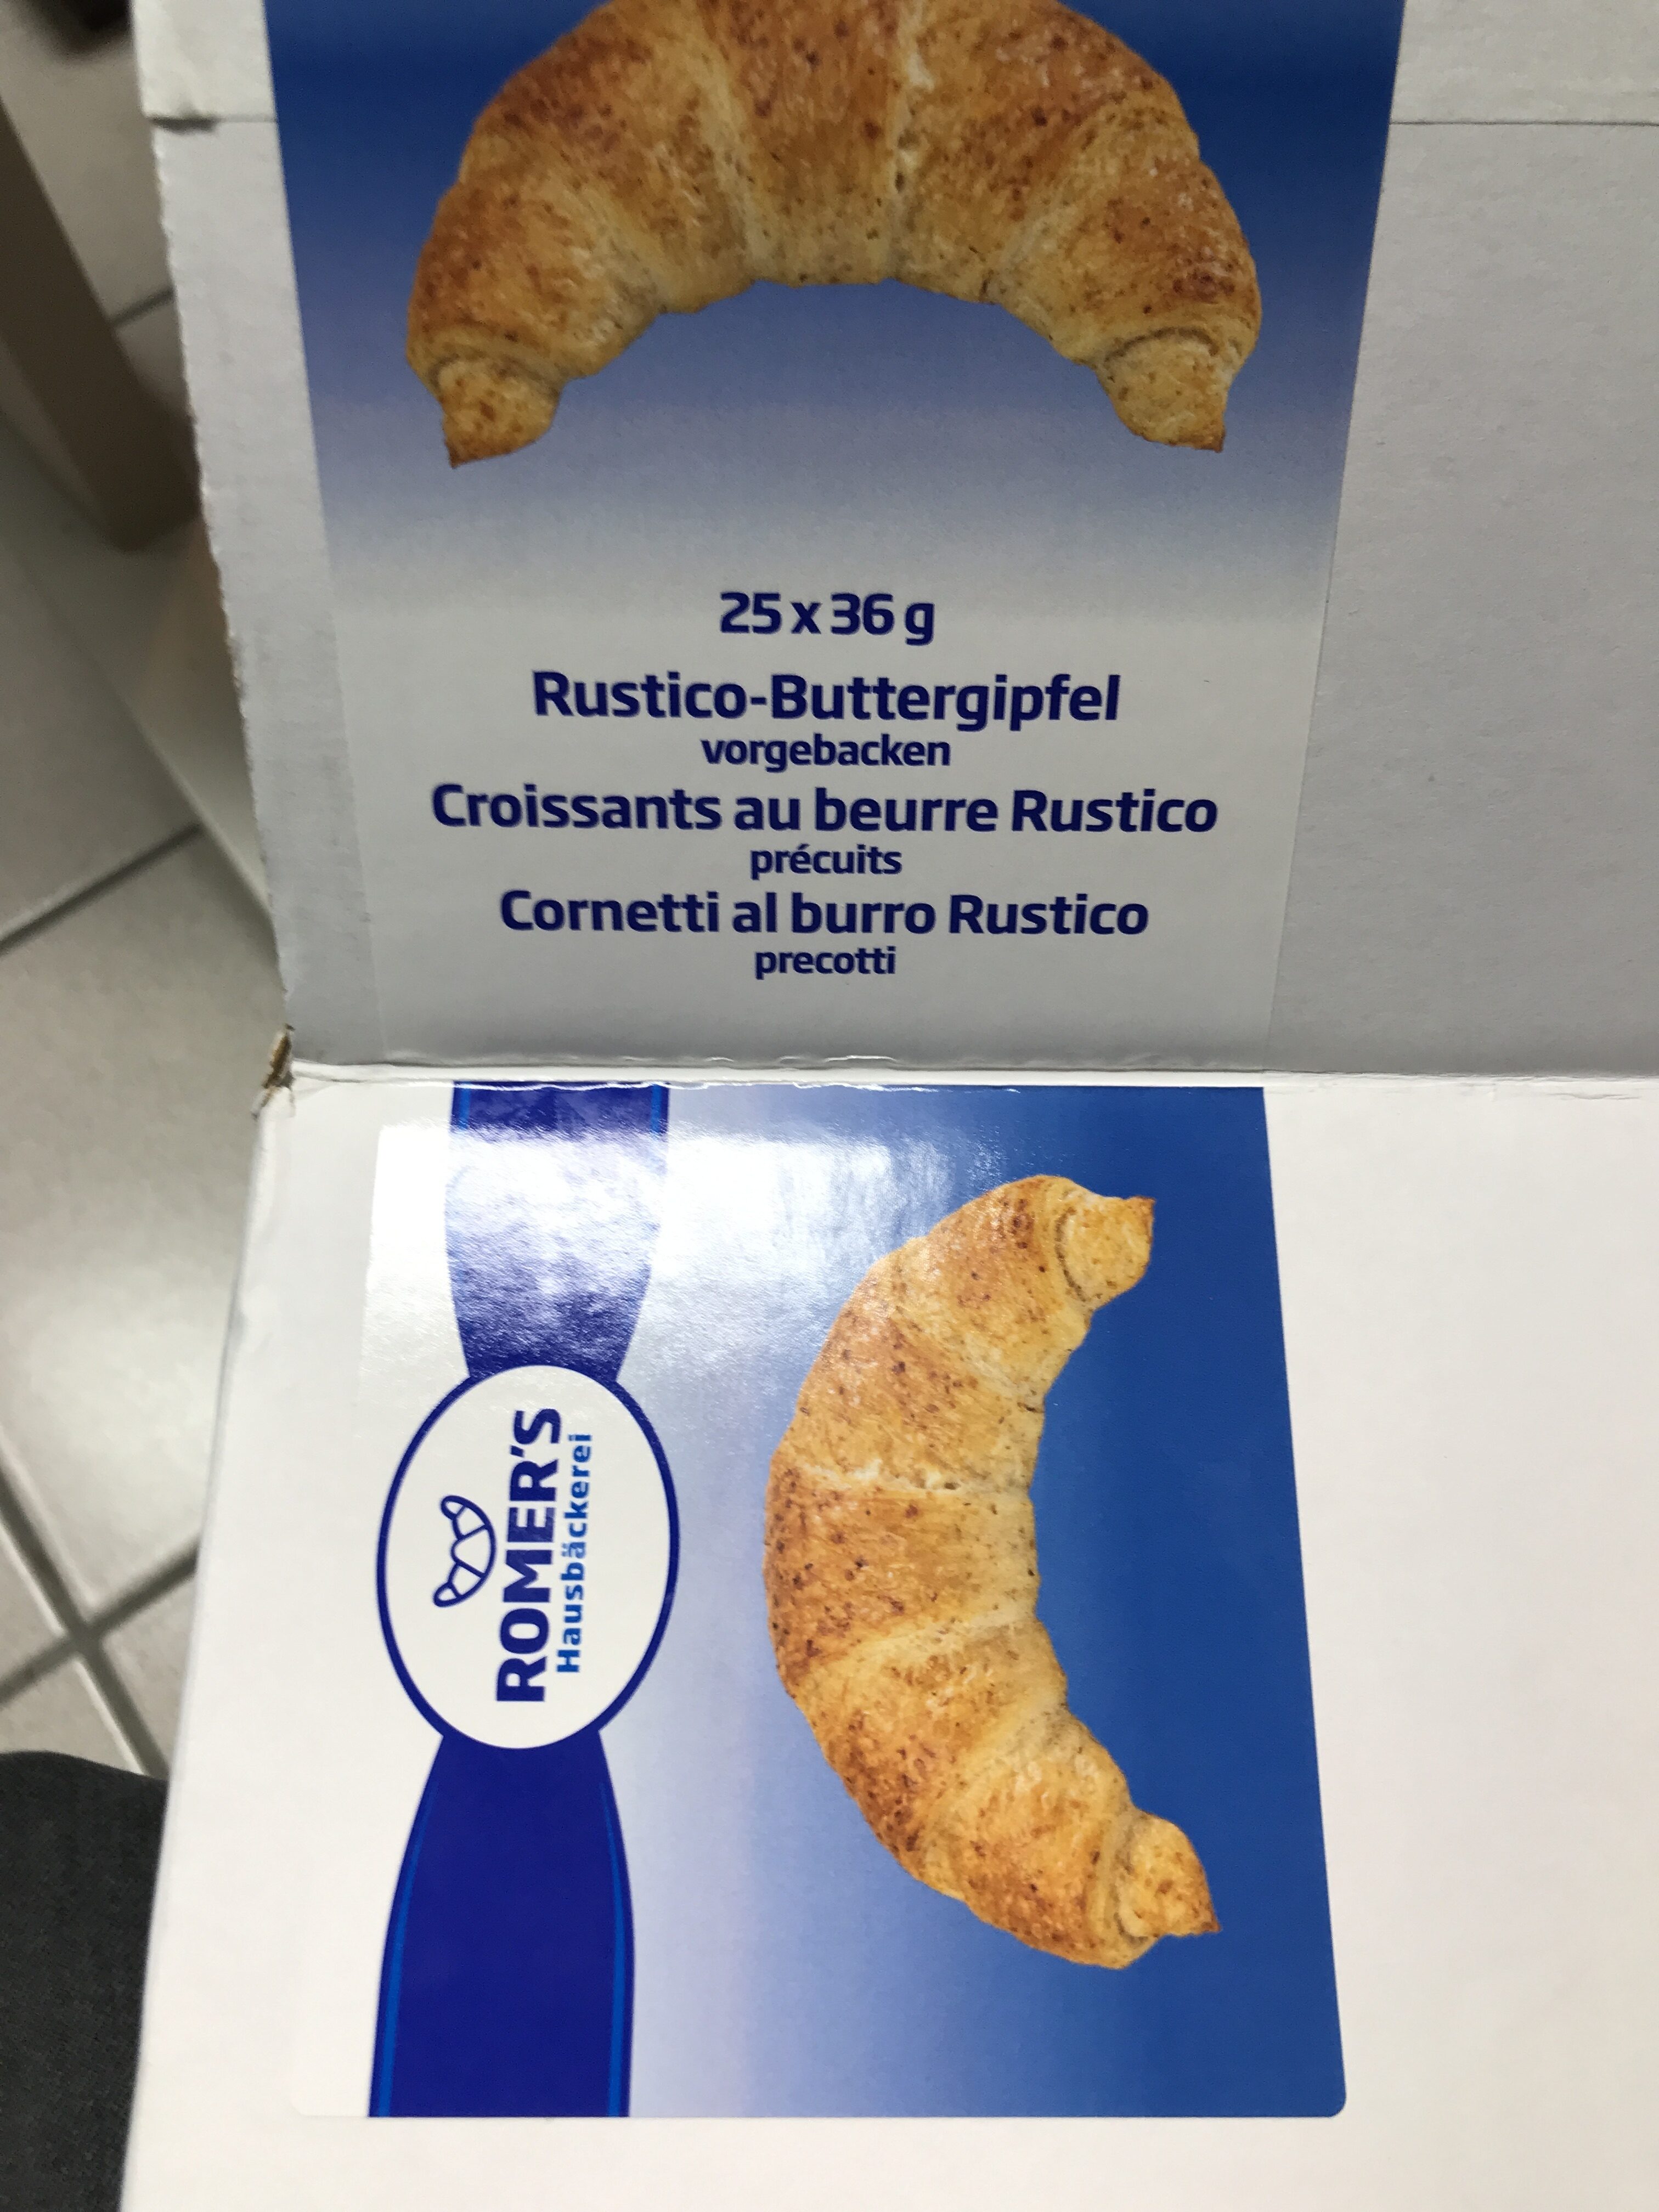 Rustico-Buttergipfel 36g - Product